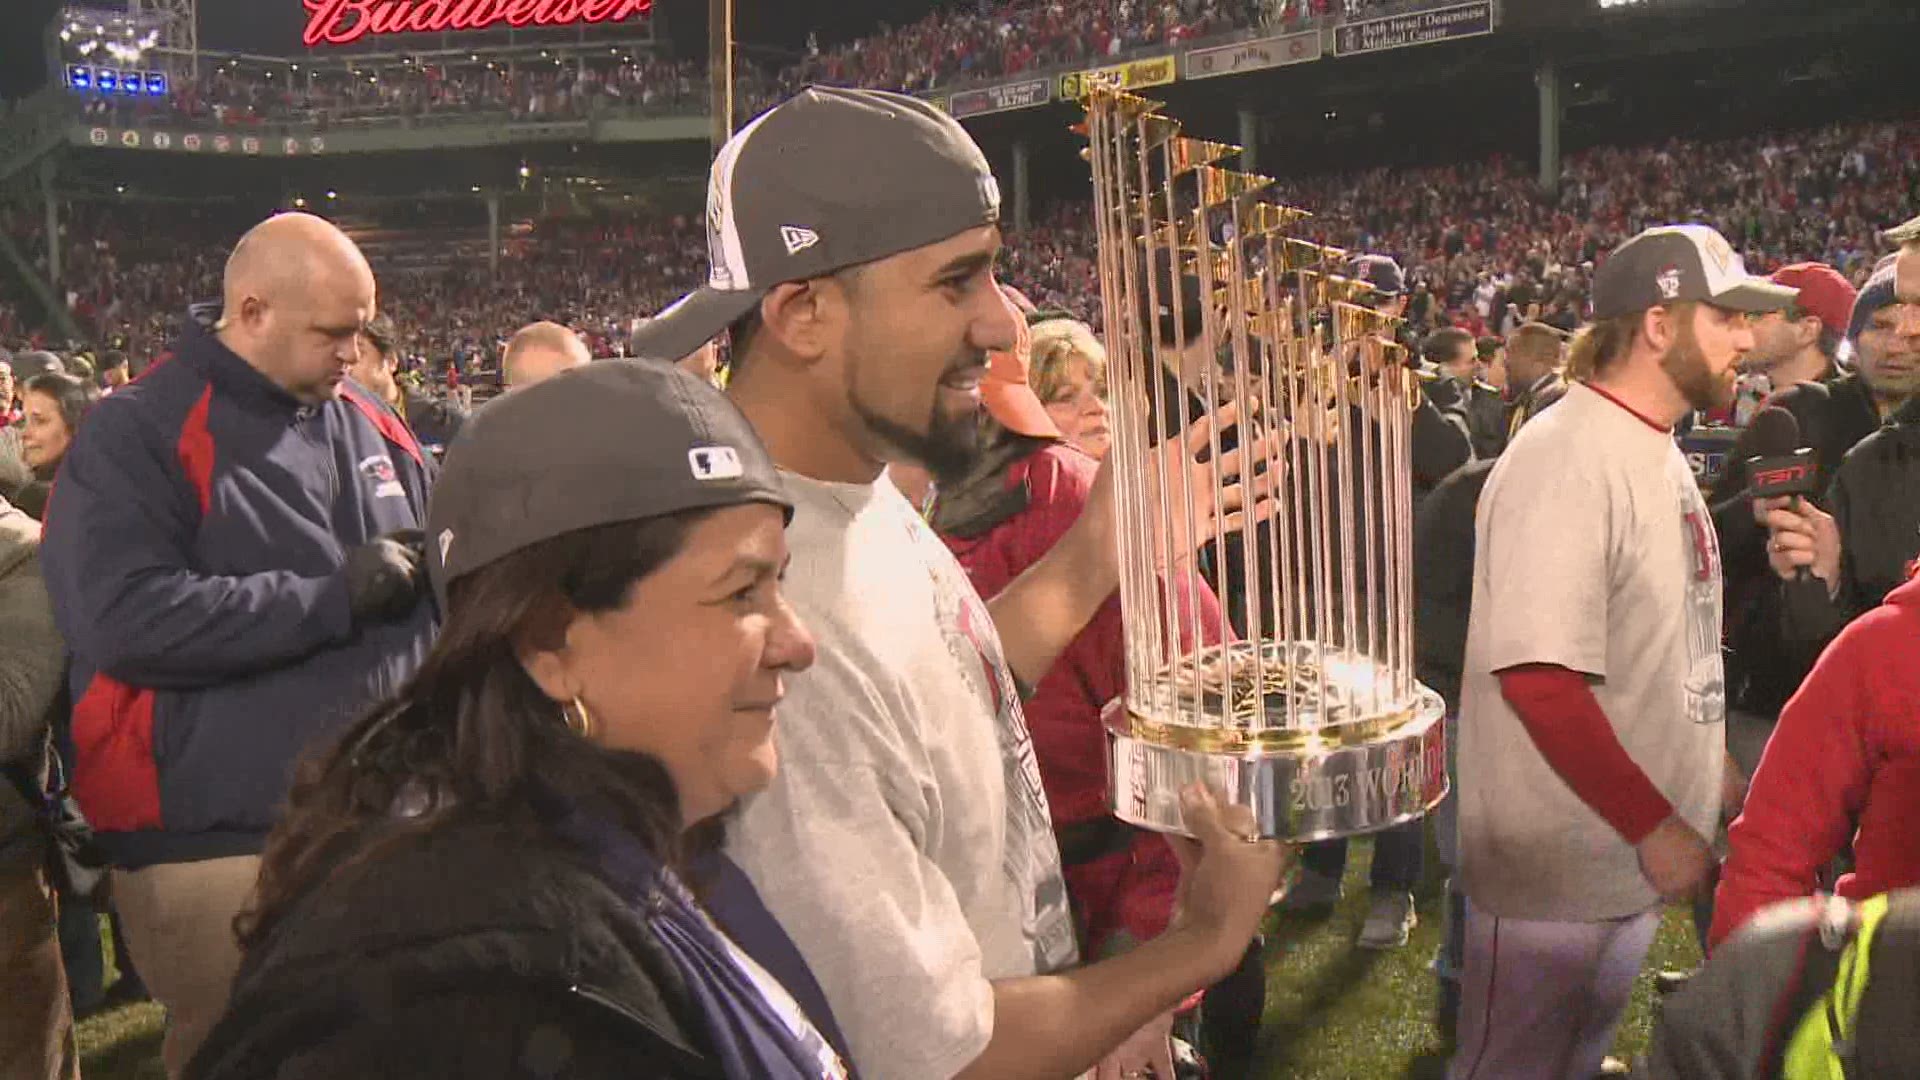 Taking a look back at the Boston Red Sox' 2013 World Series